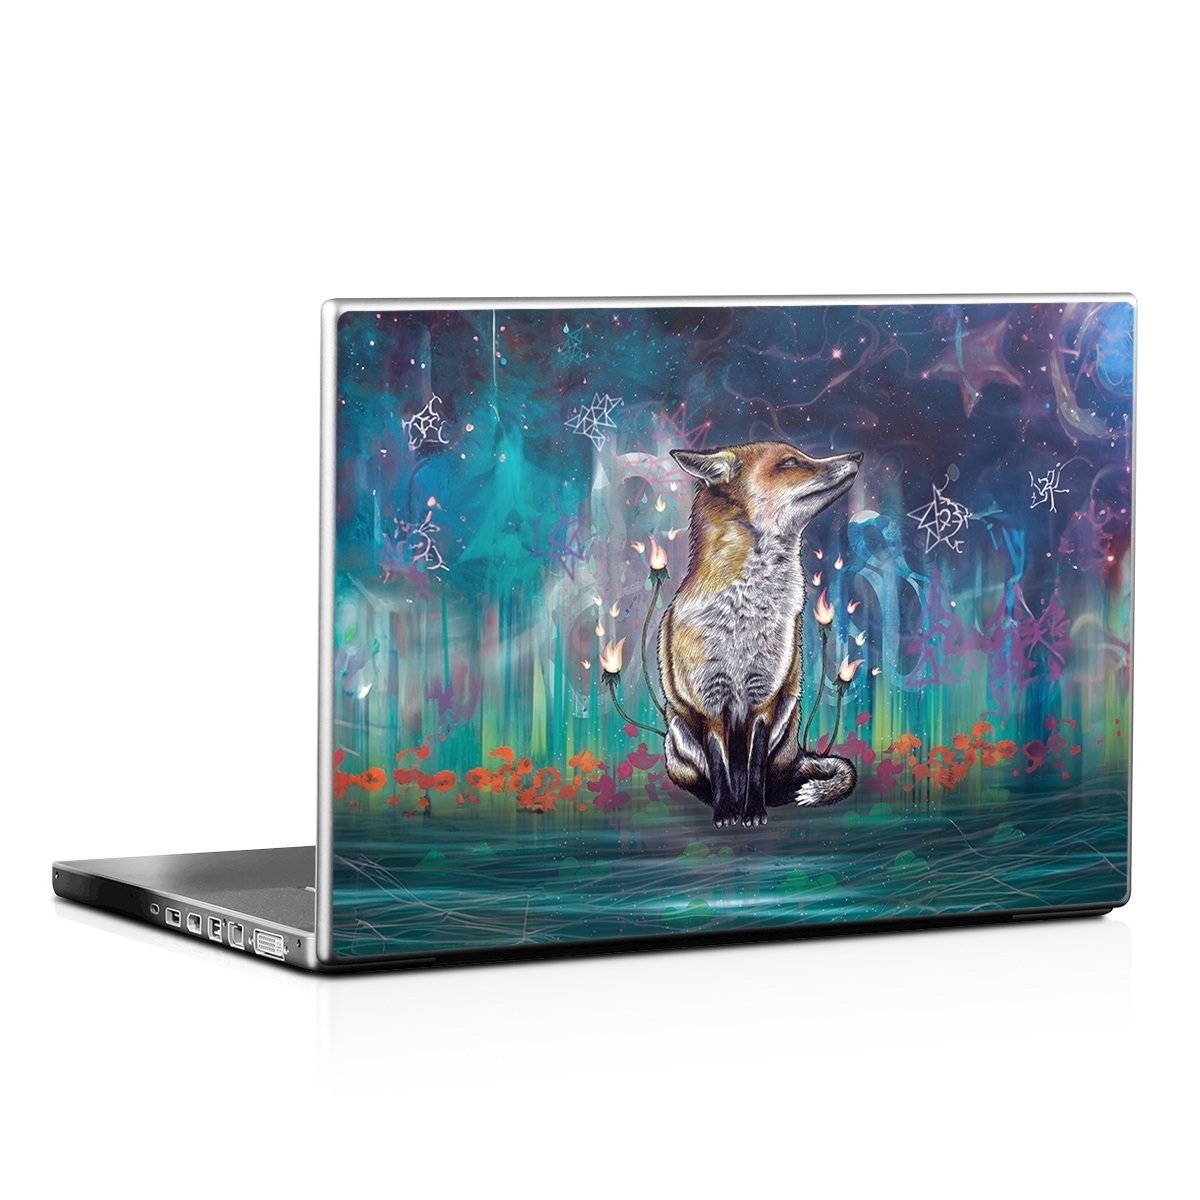 Laptop Skin - There is a Light (Image 1)